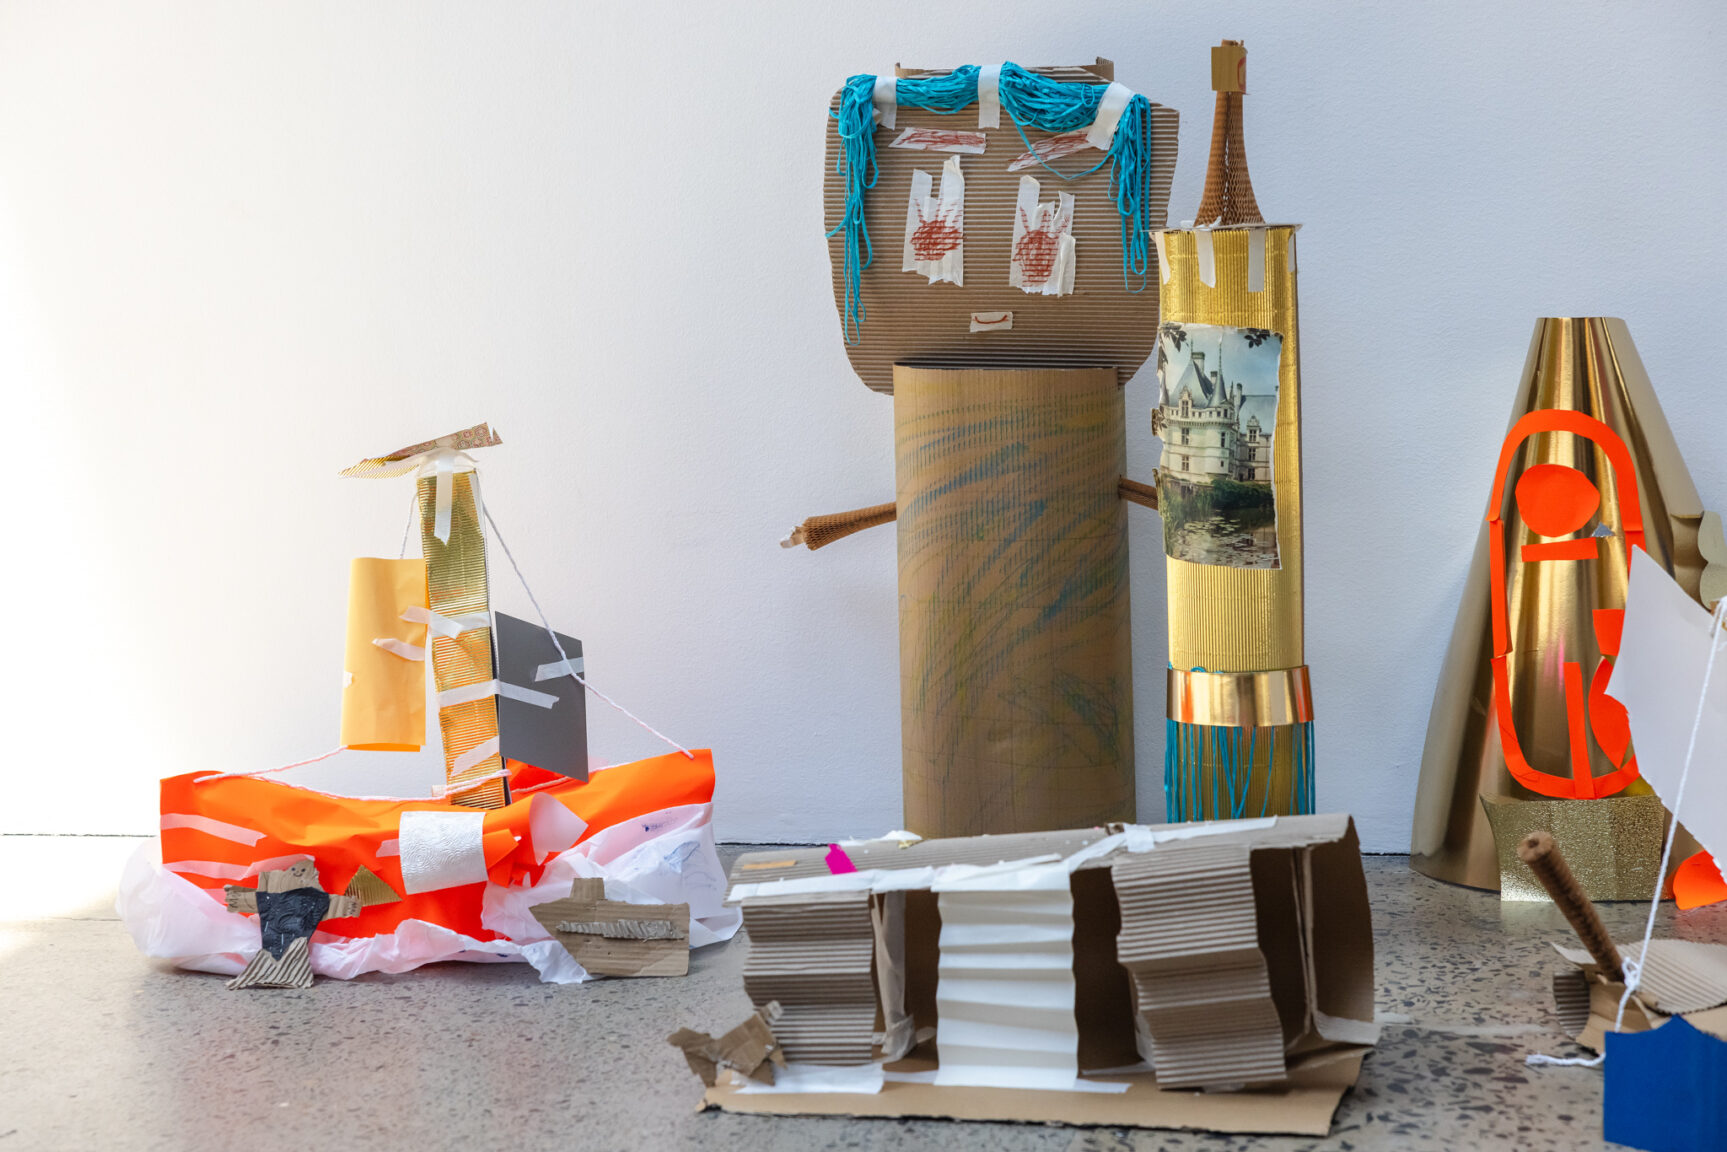 a group of cardboard creations inspired by Salote Tawale's exhibition